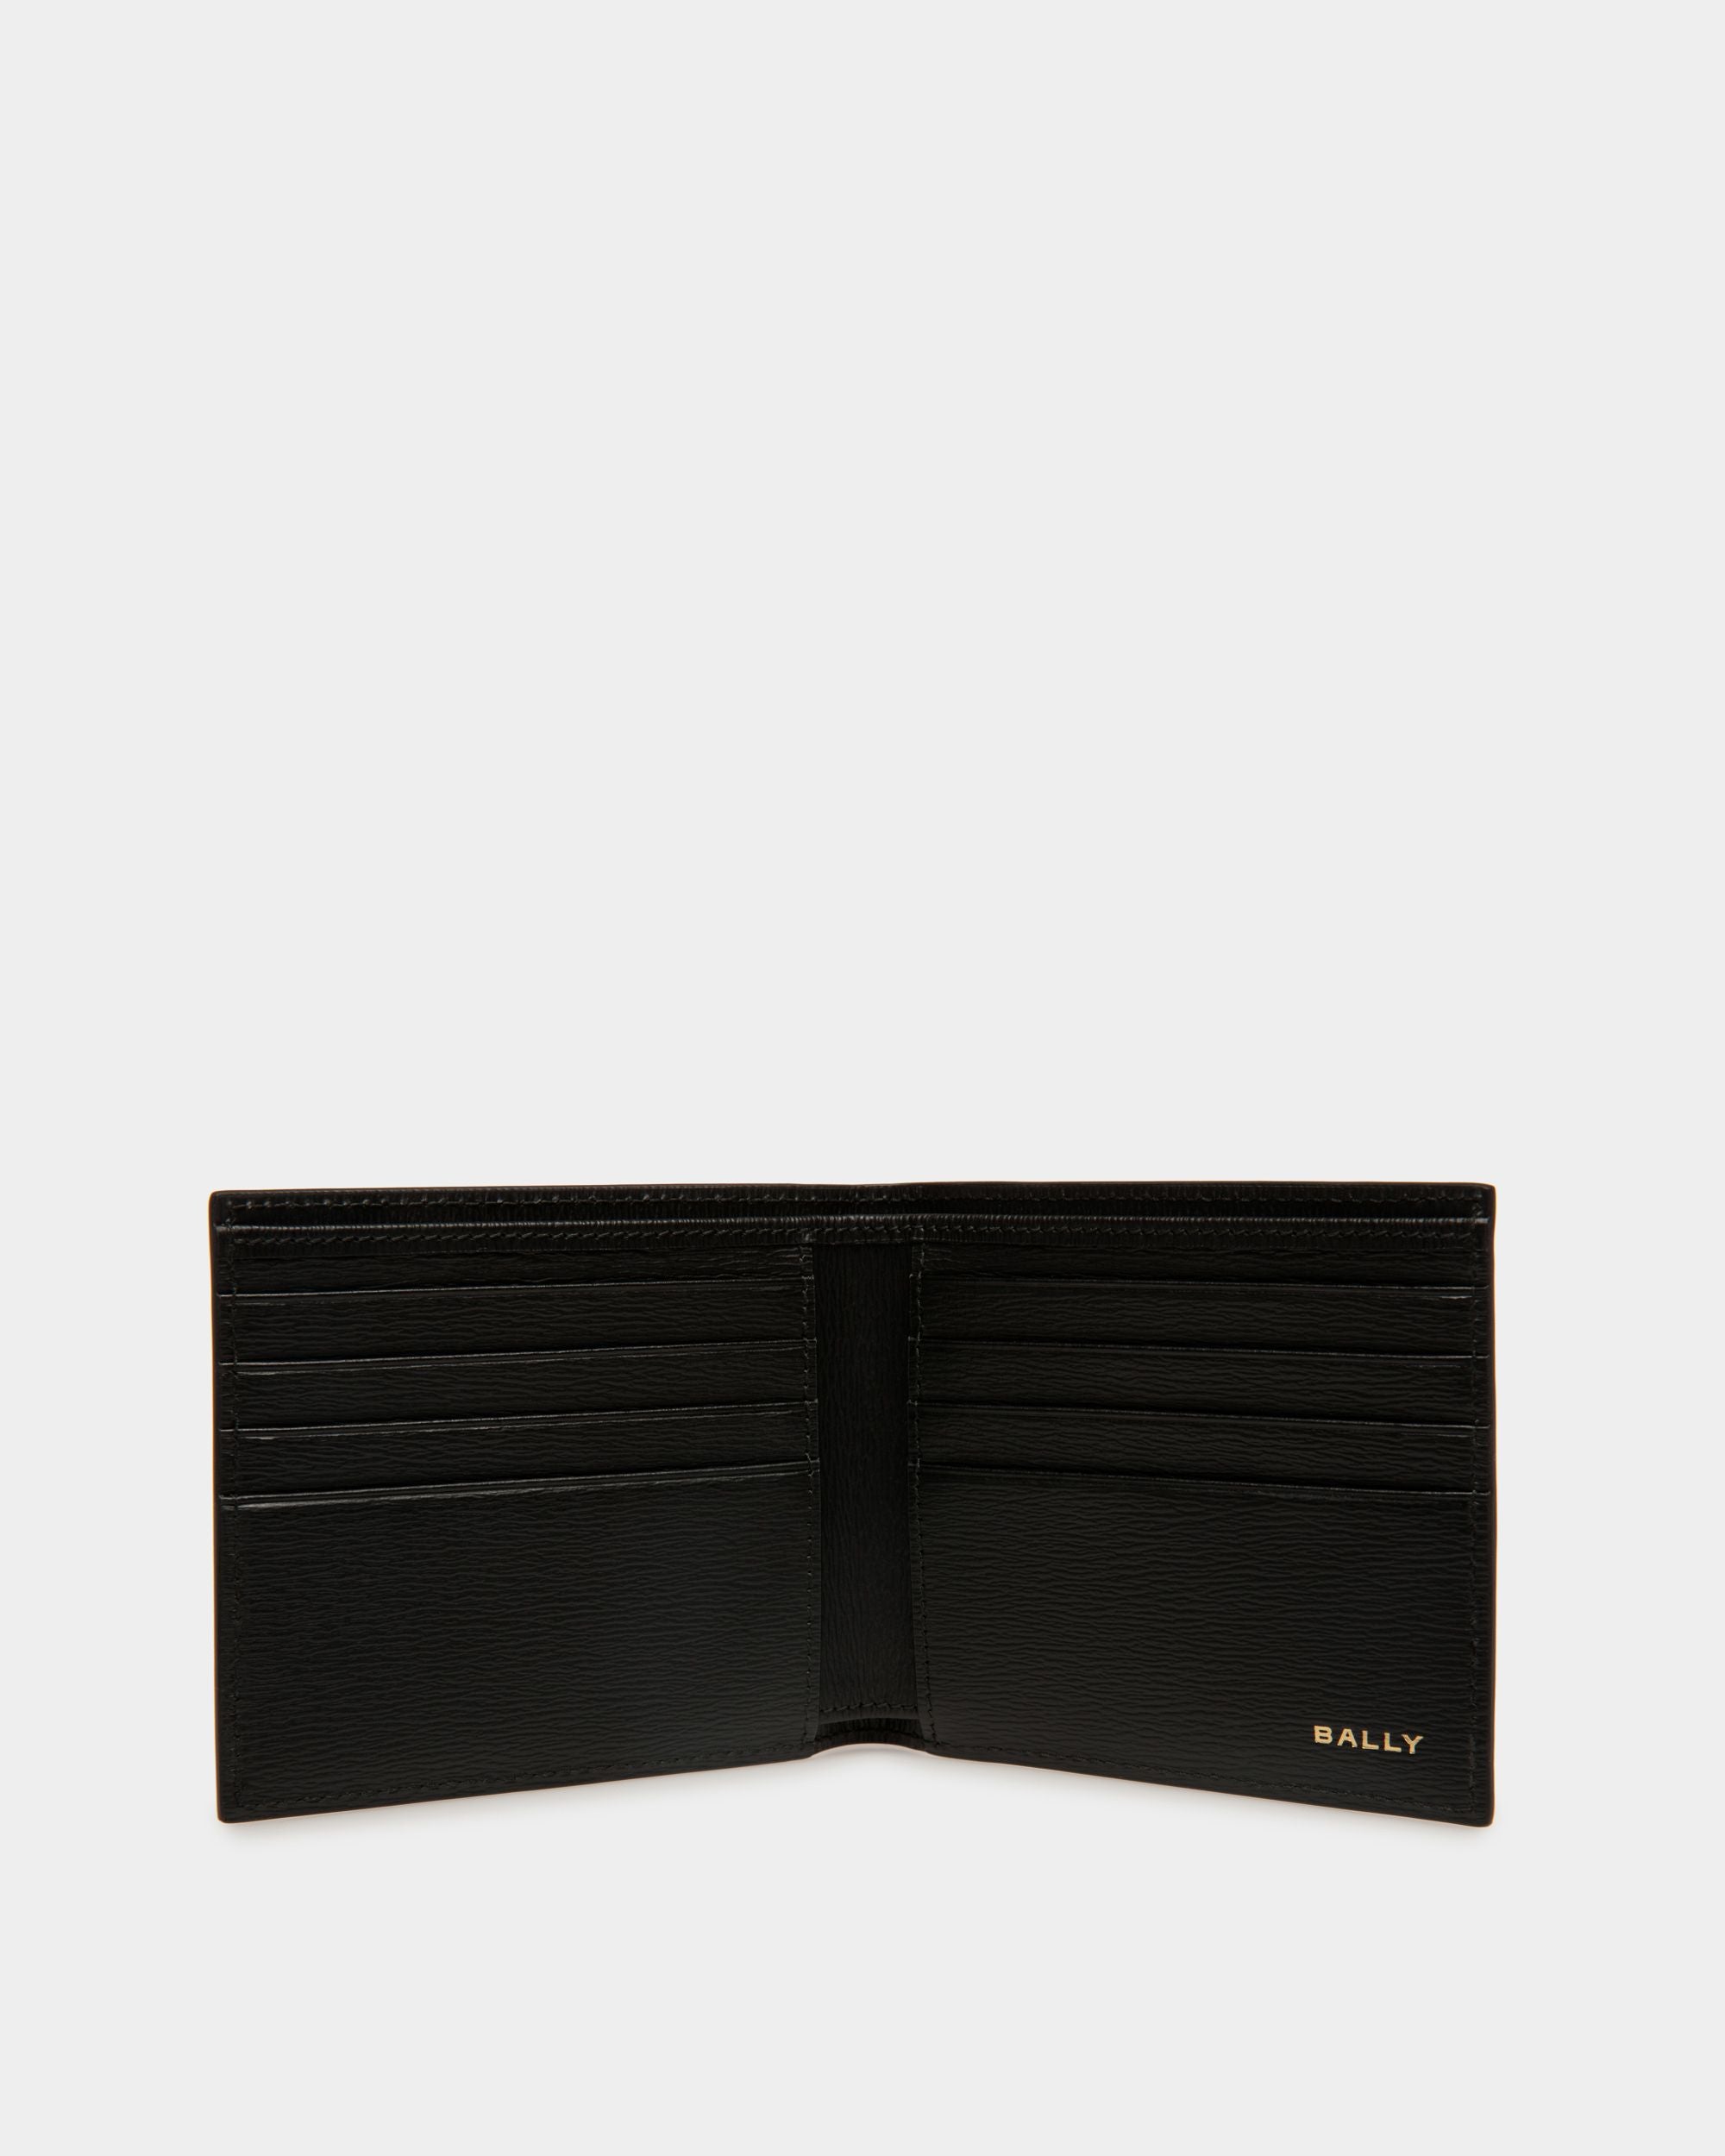 Cny | Men's Bifold Wallet in Black And Red Grained Leather | Bally | Still Life Open / Inside